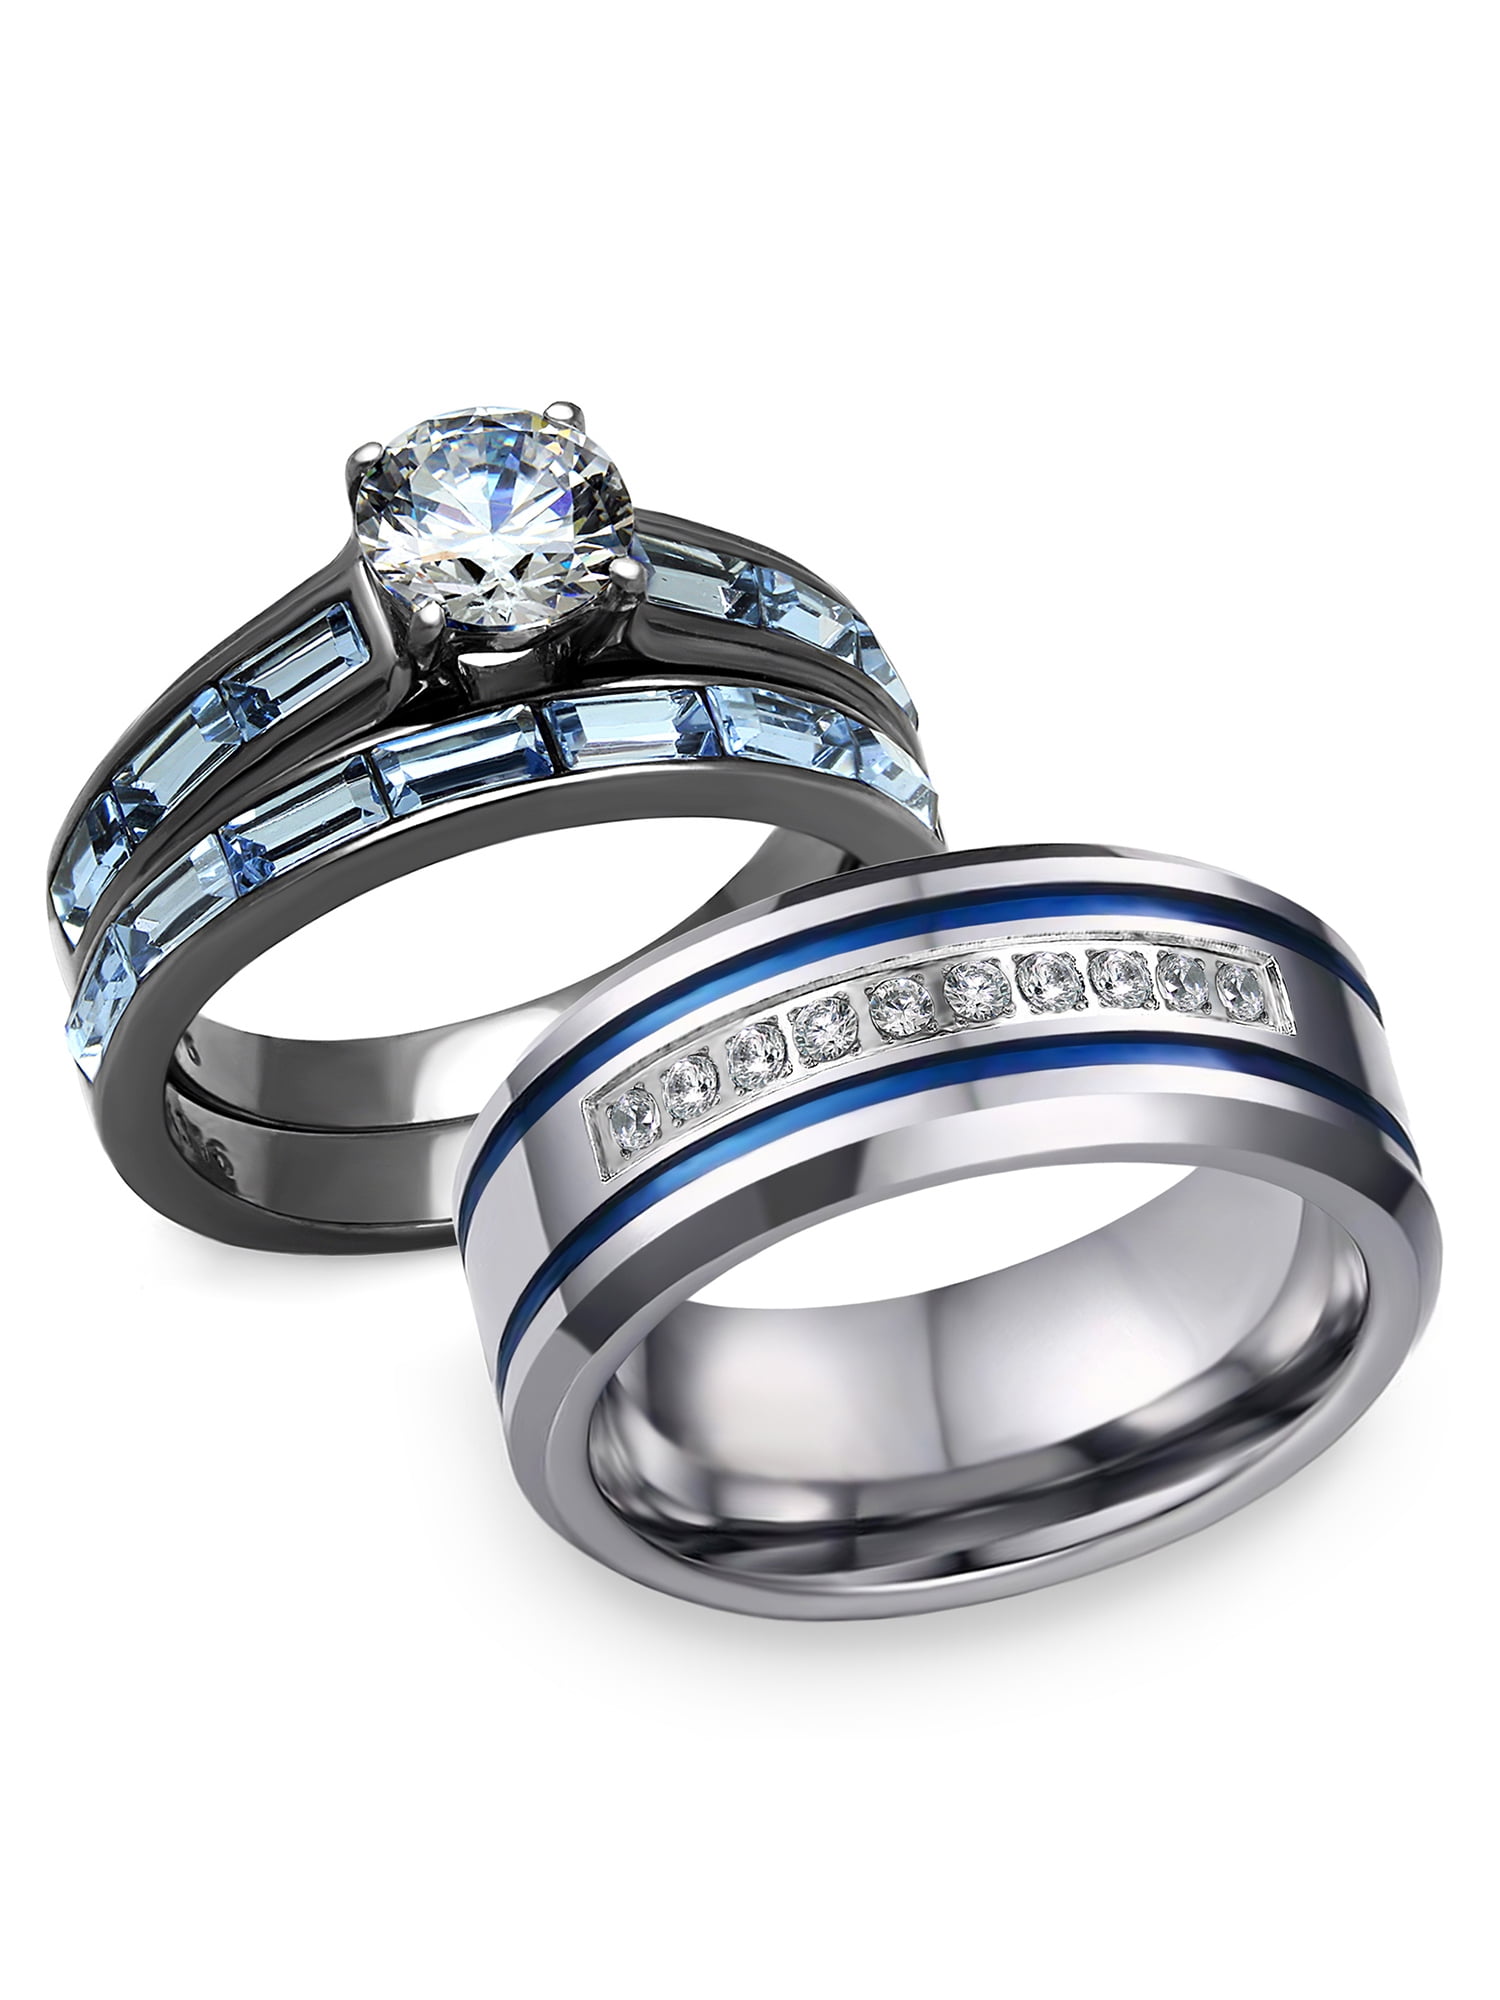 AONEW His and Hers Couple Rings Bridal Sets Heart Blue Cz Womens Wedding Ring Sets & Celtic Knot Stainless Steel Men Wedding Band【Buy Two Rings for One Pair】 